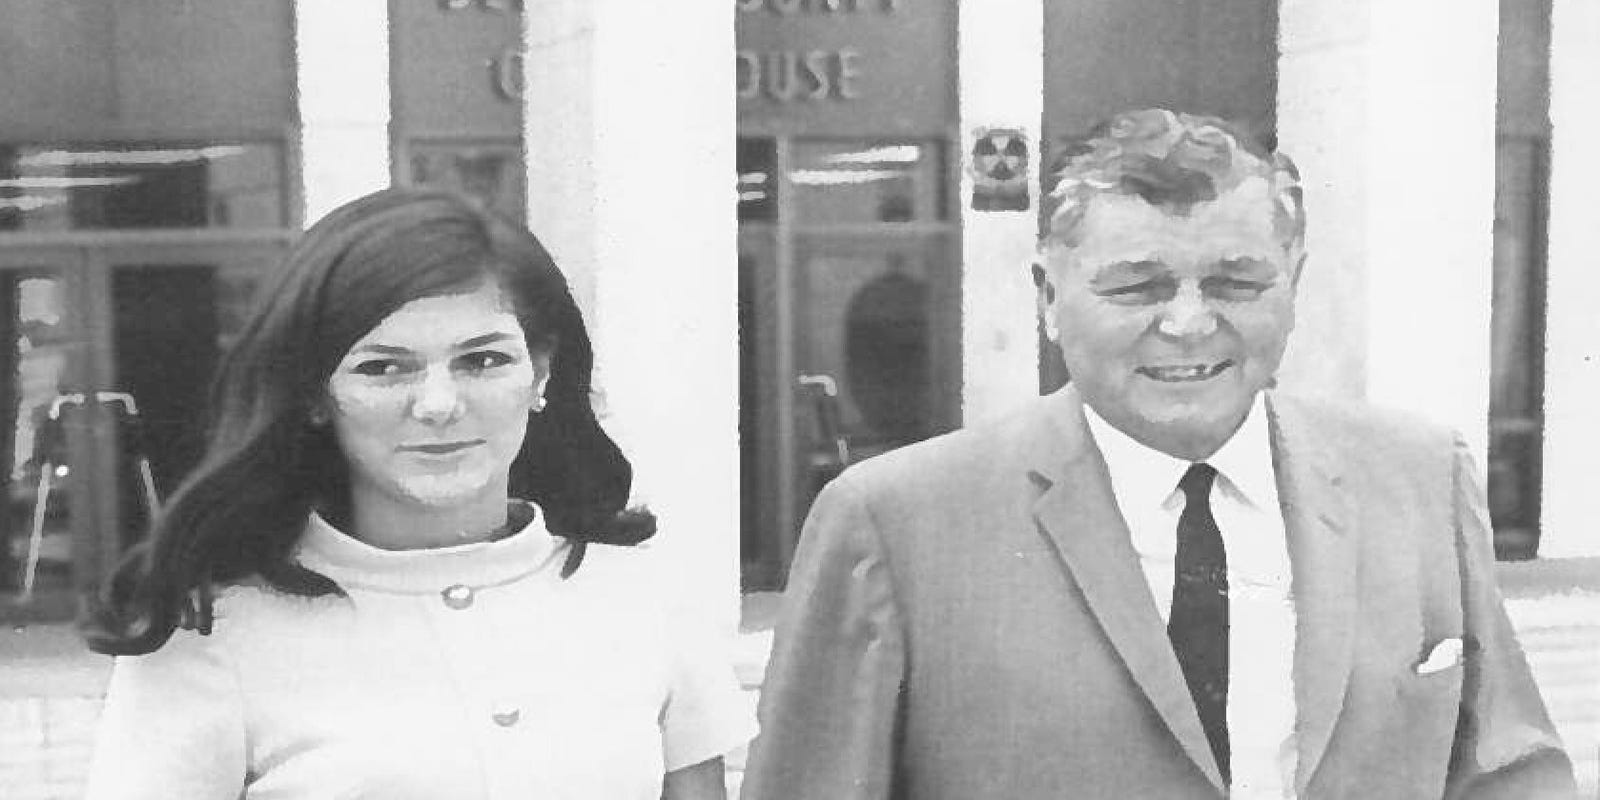 A kidnapping with Deltona ties gripped the nation 50 years ago